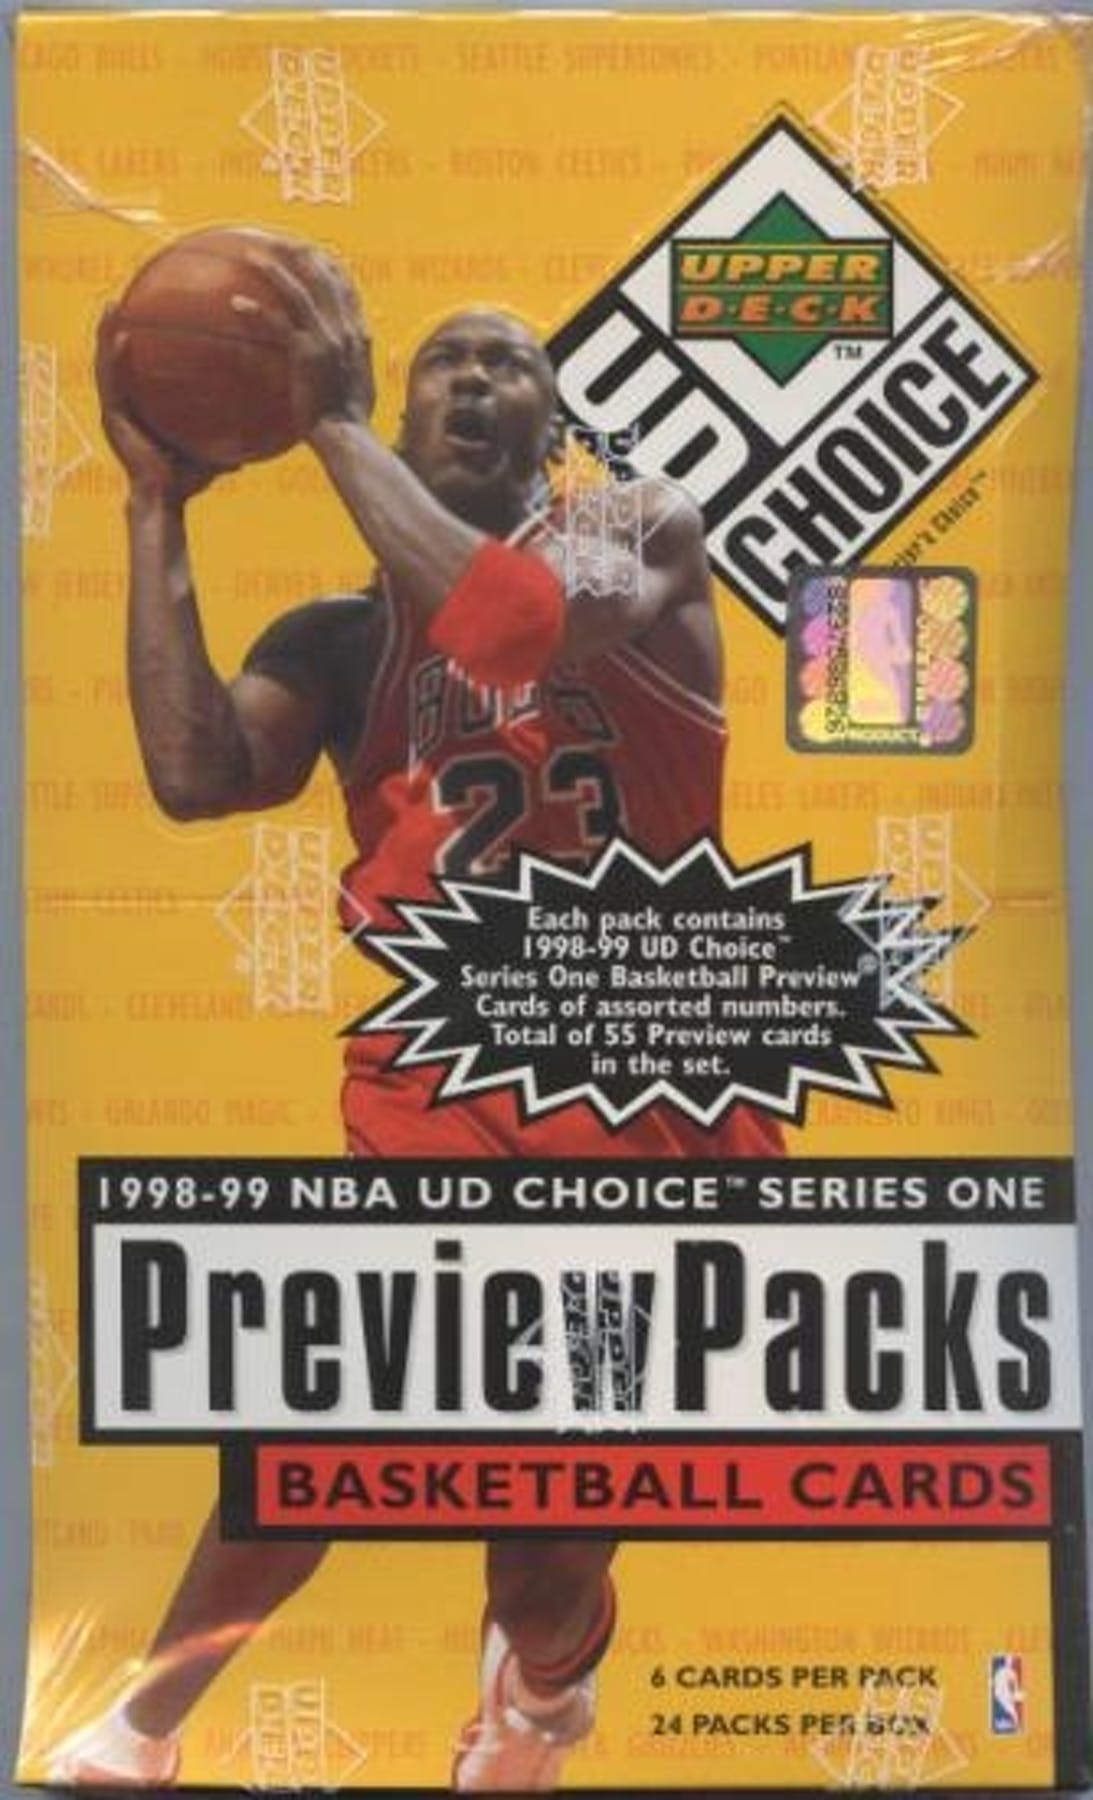 1998-99 UD Choice Preview Hobby Box | Eastridge Sports Cards